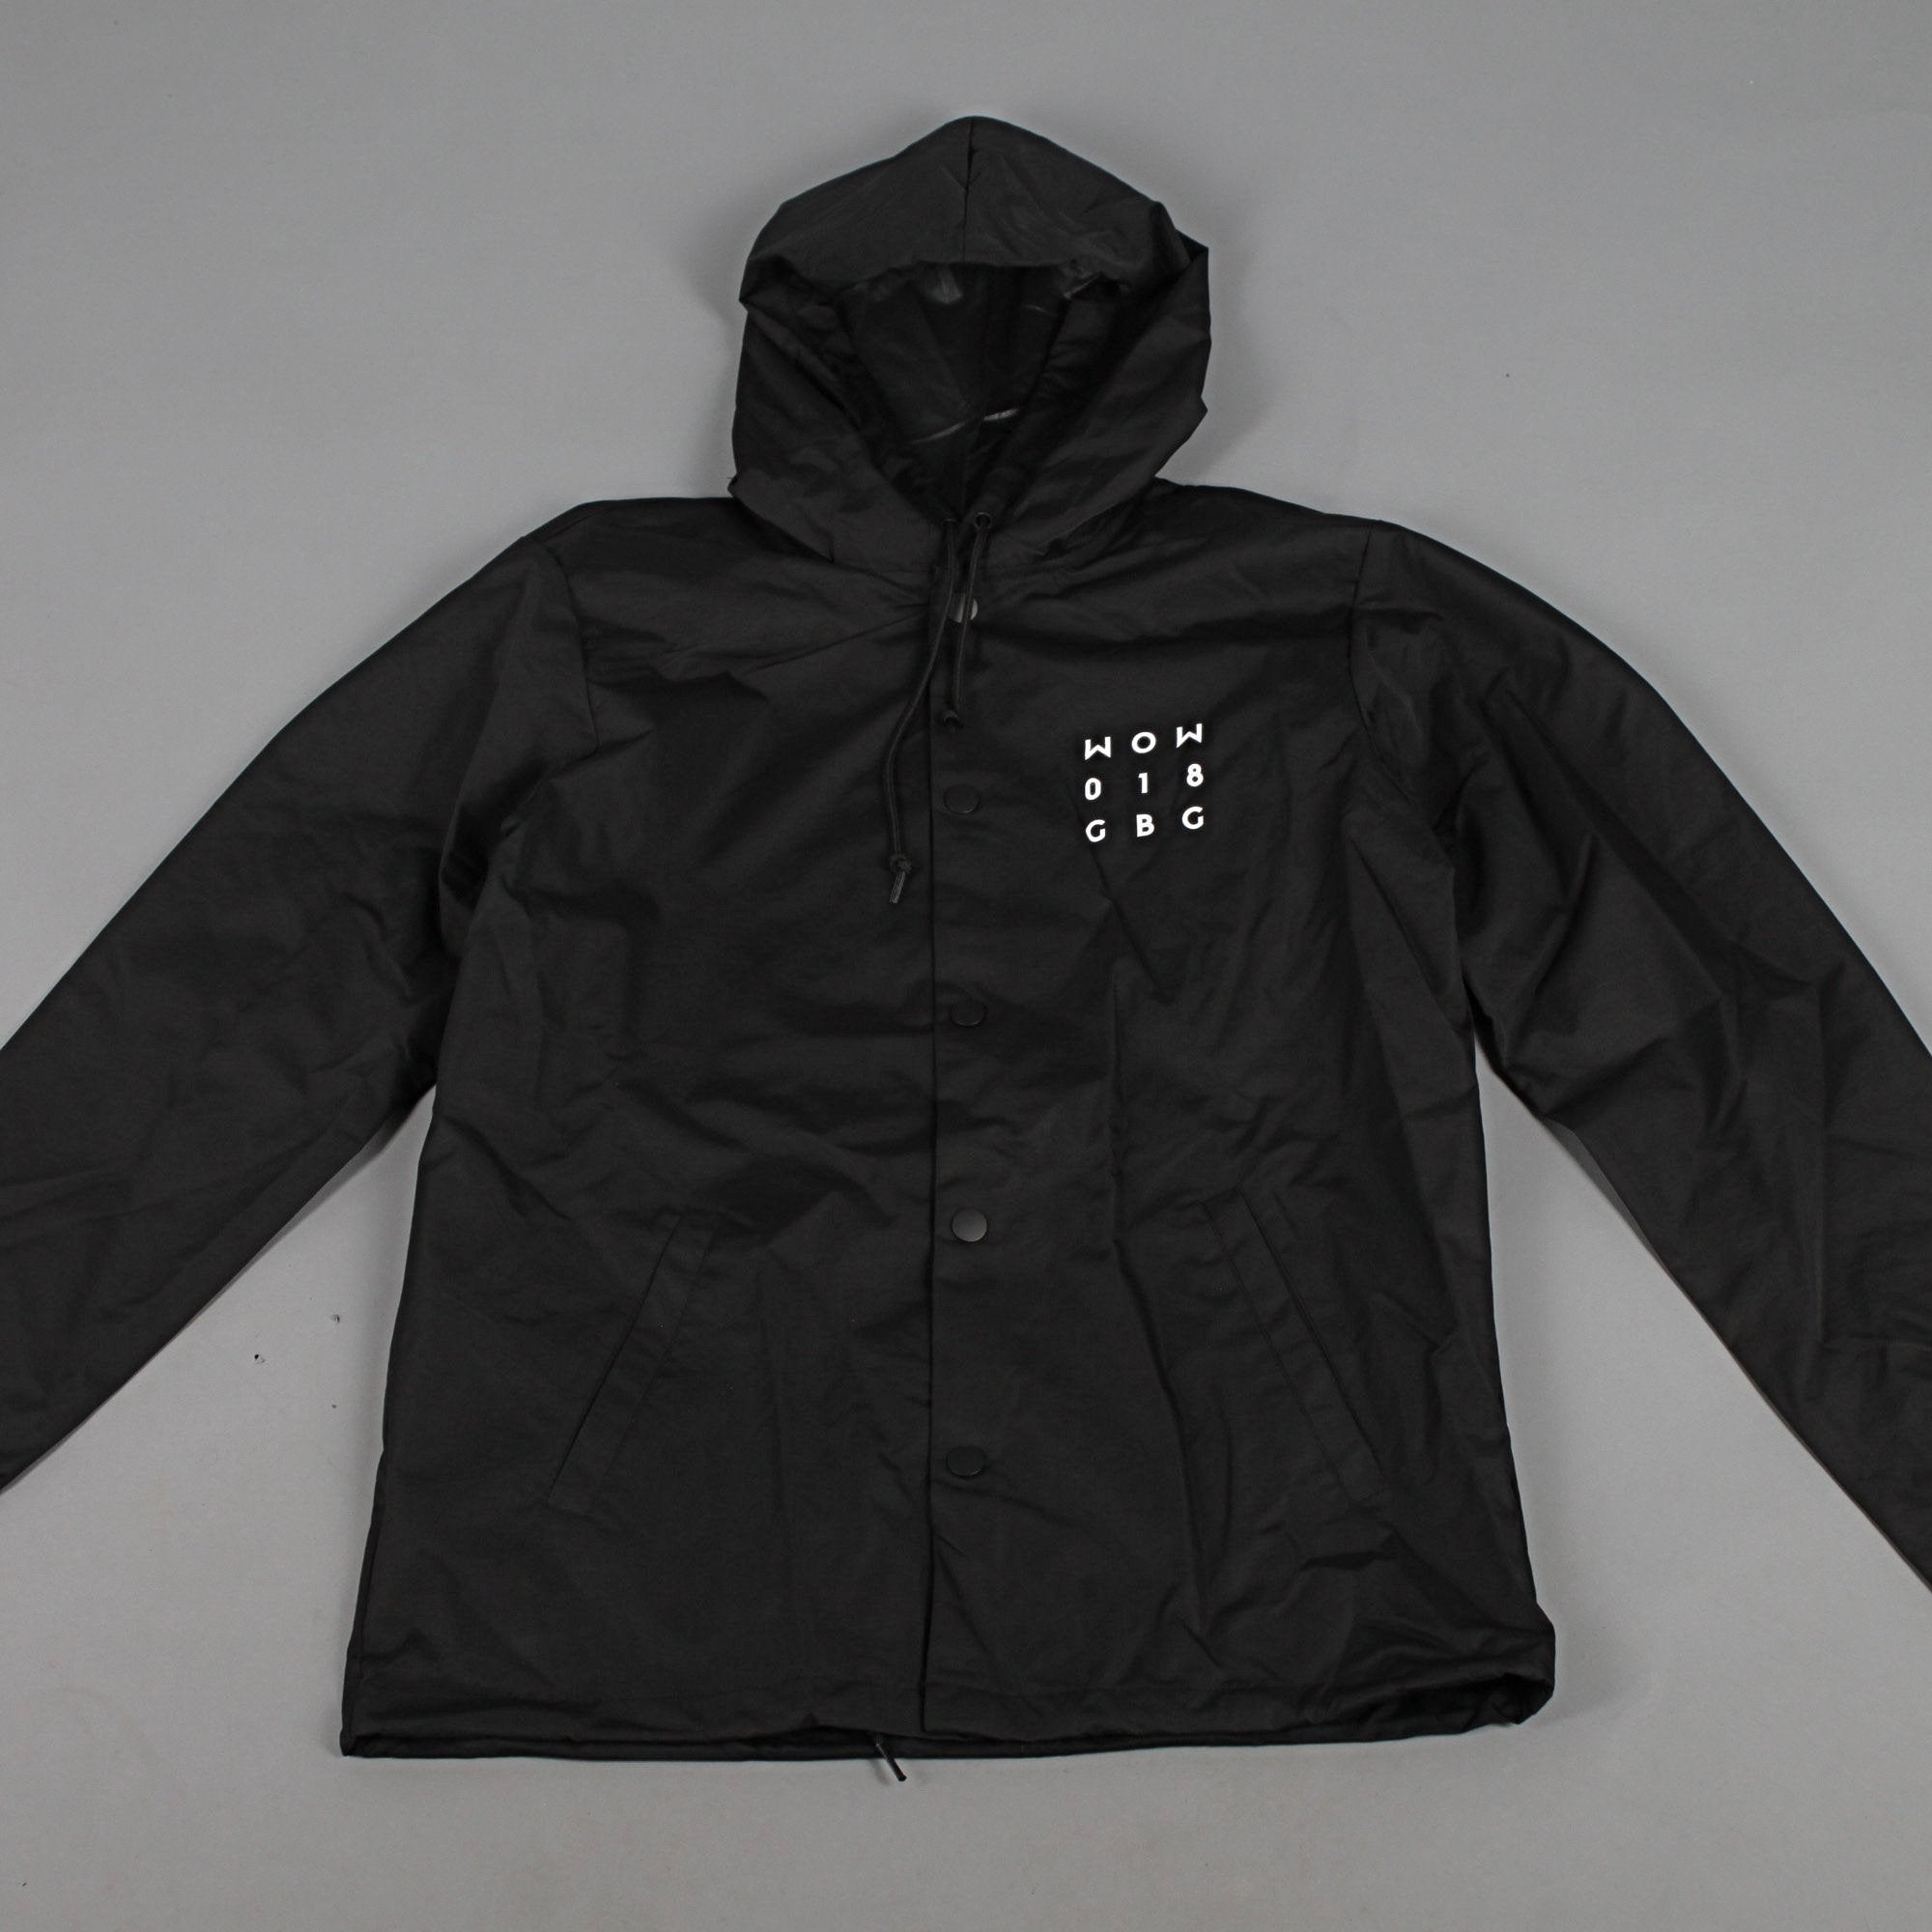 WOW 2018 Hooded Jacket